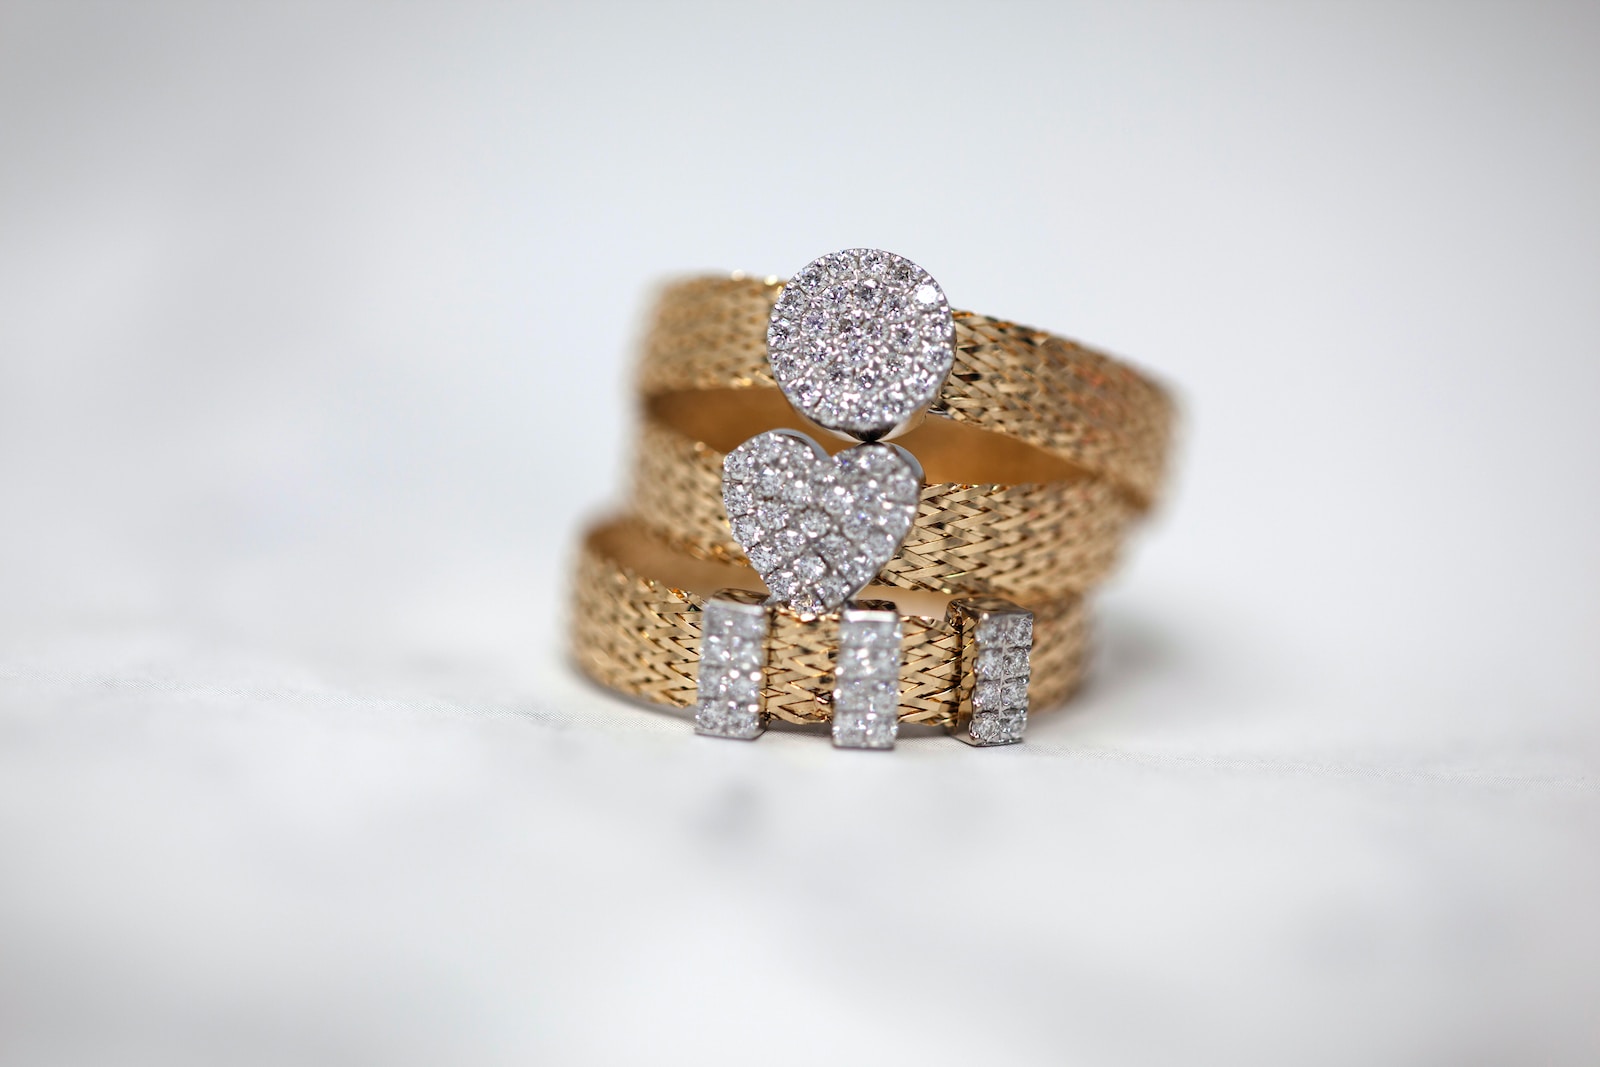 three gold-colored studded rings